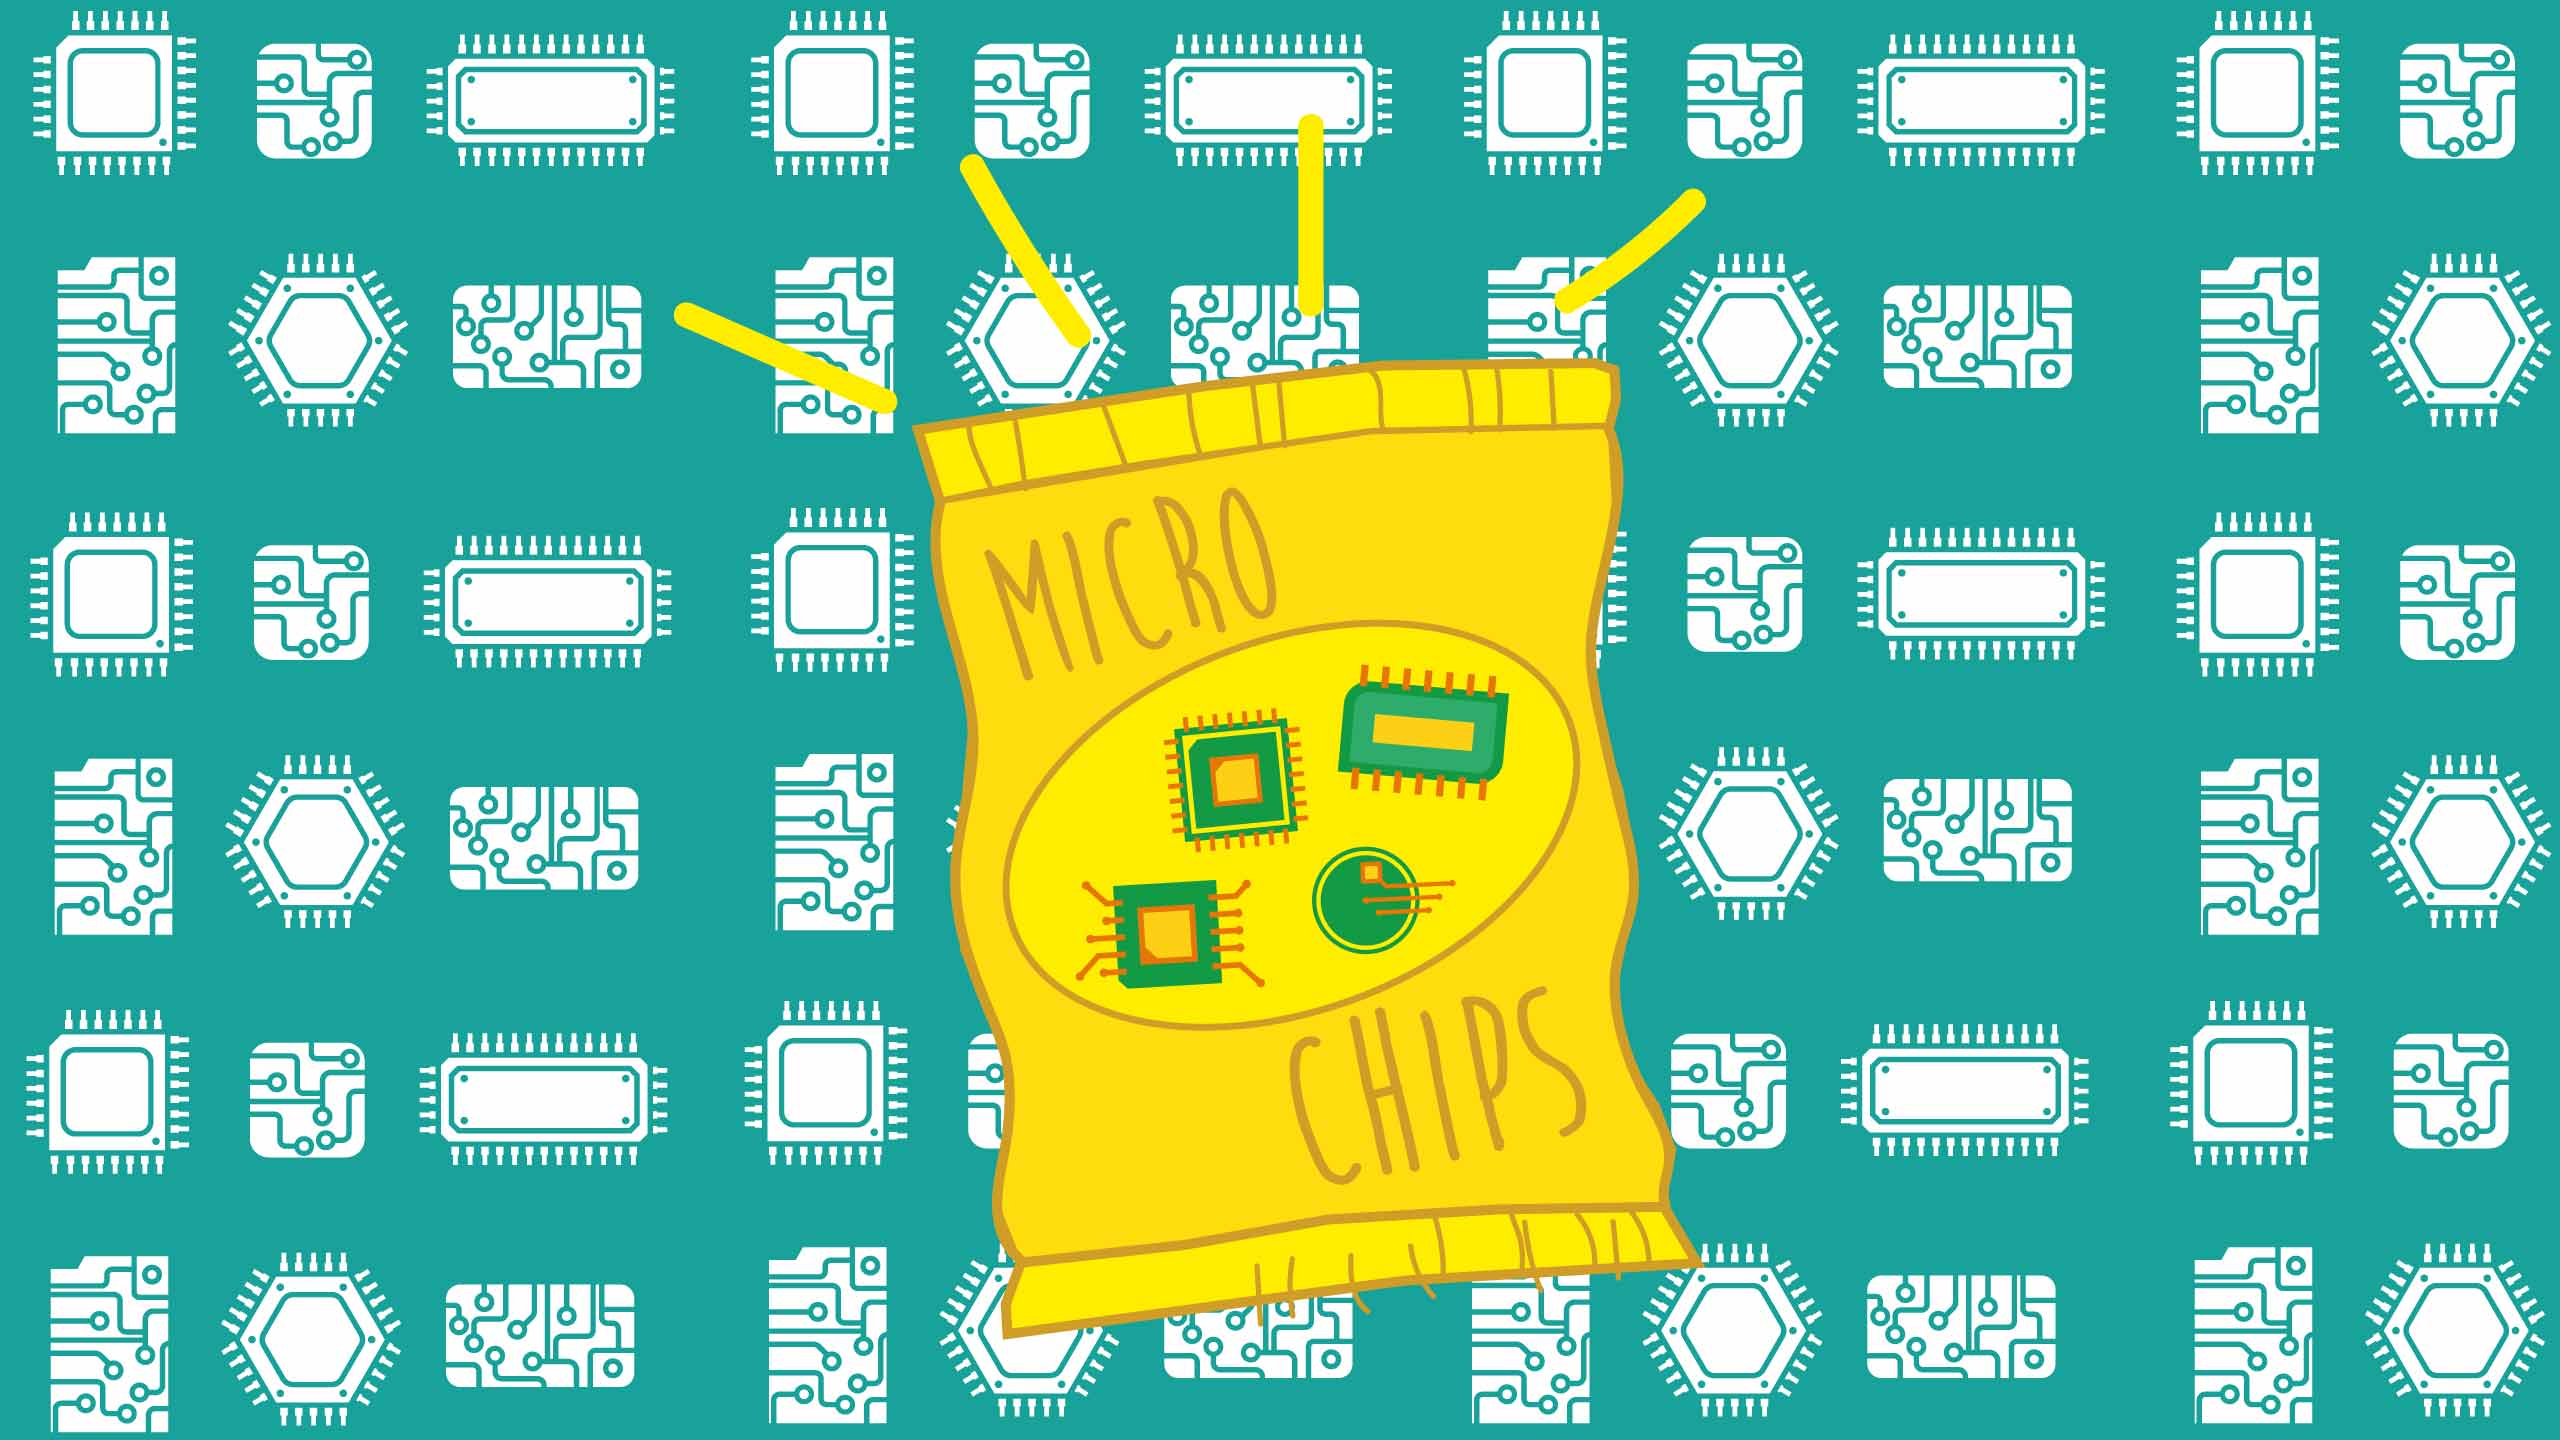 A bag of chips filled with microchips